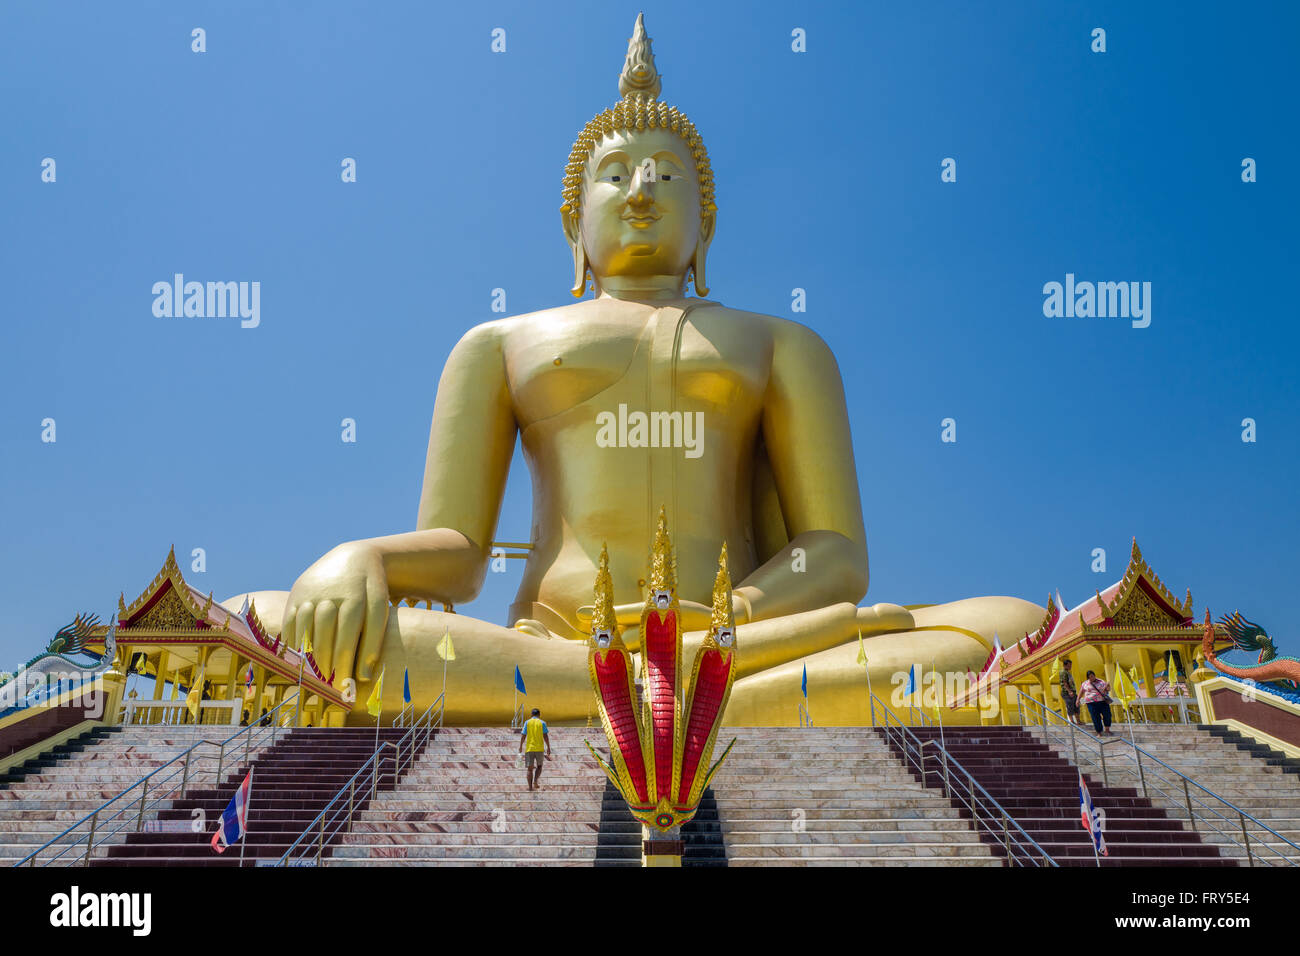 The Great Buddha of Thailand at Wat Muang Temple in Ang Thong Province Stock Photo